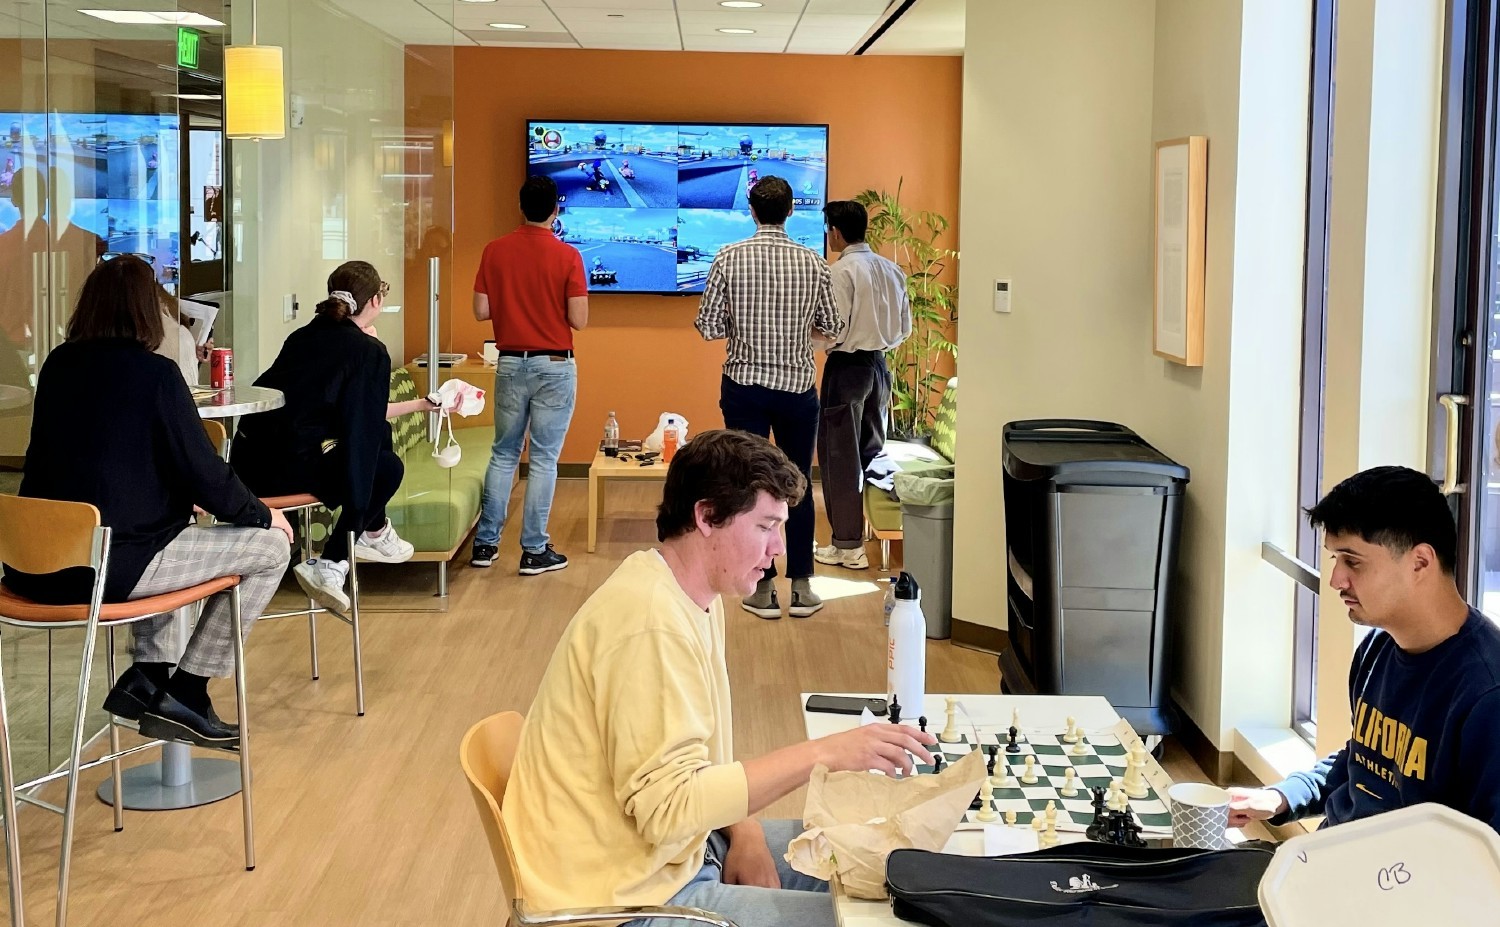 Gaming Tuesdays in the SF office.
Staff gathers to enjoy lunch together and play video and table games on Tuesdays.